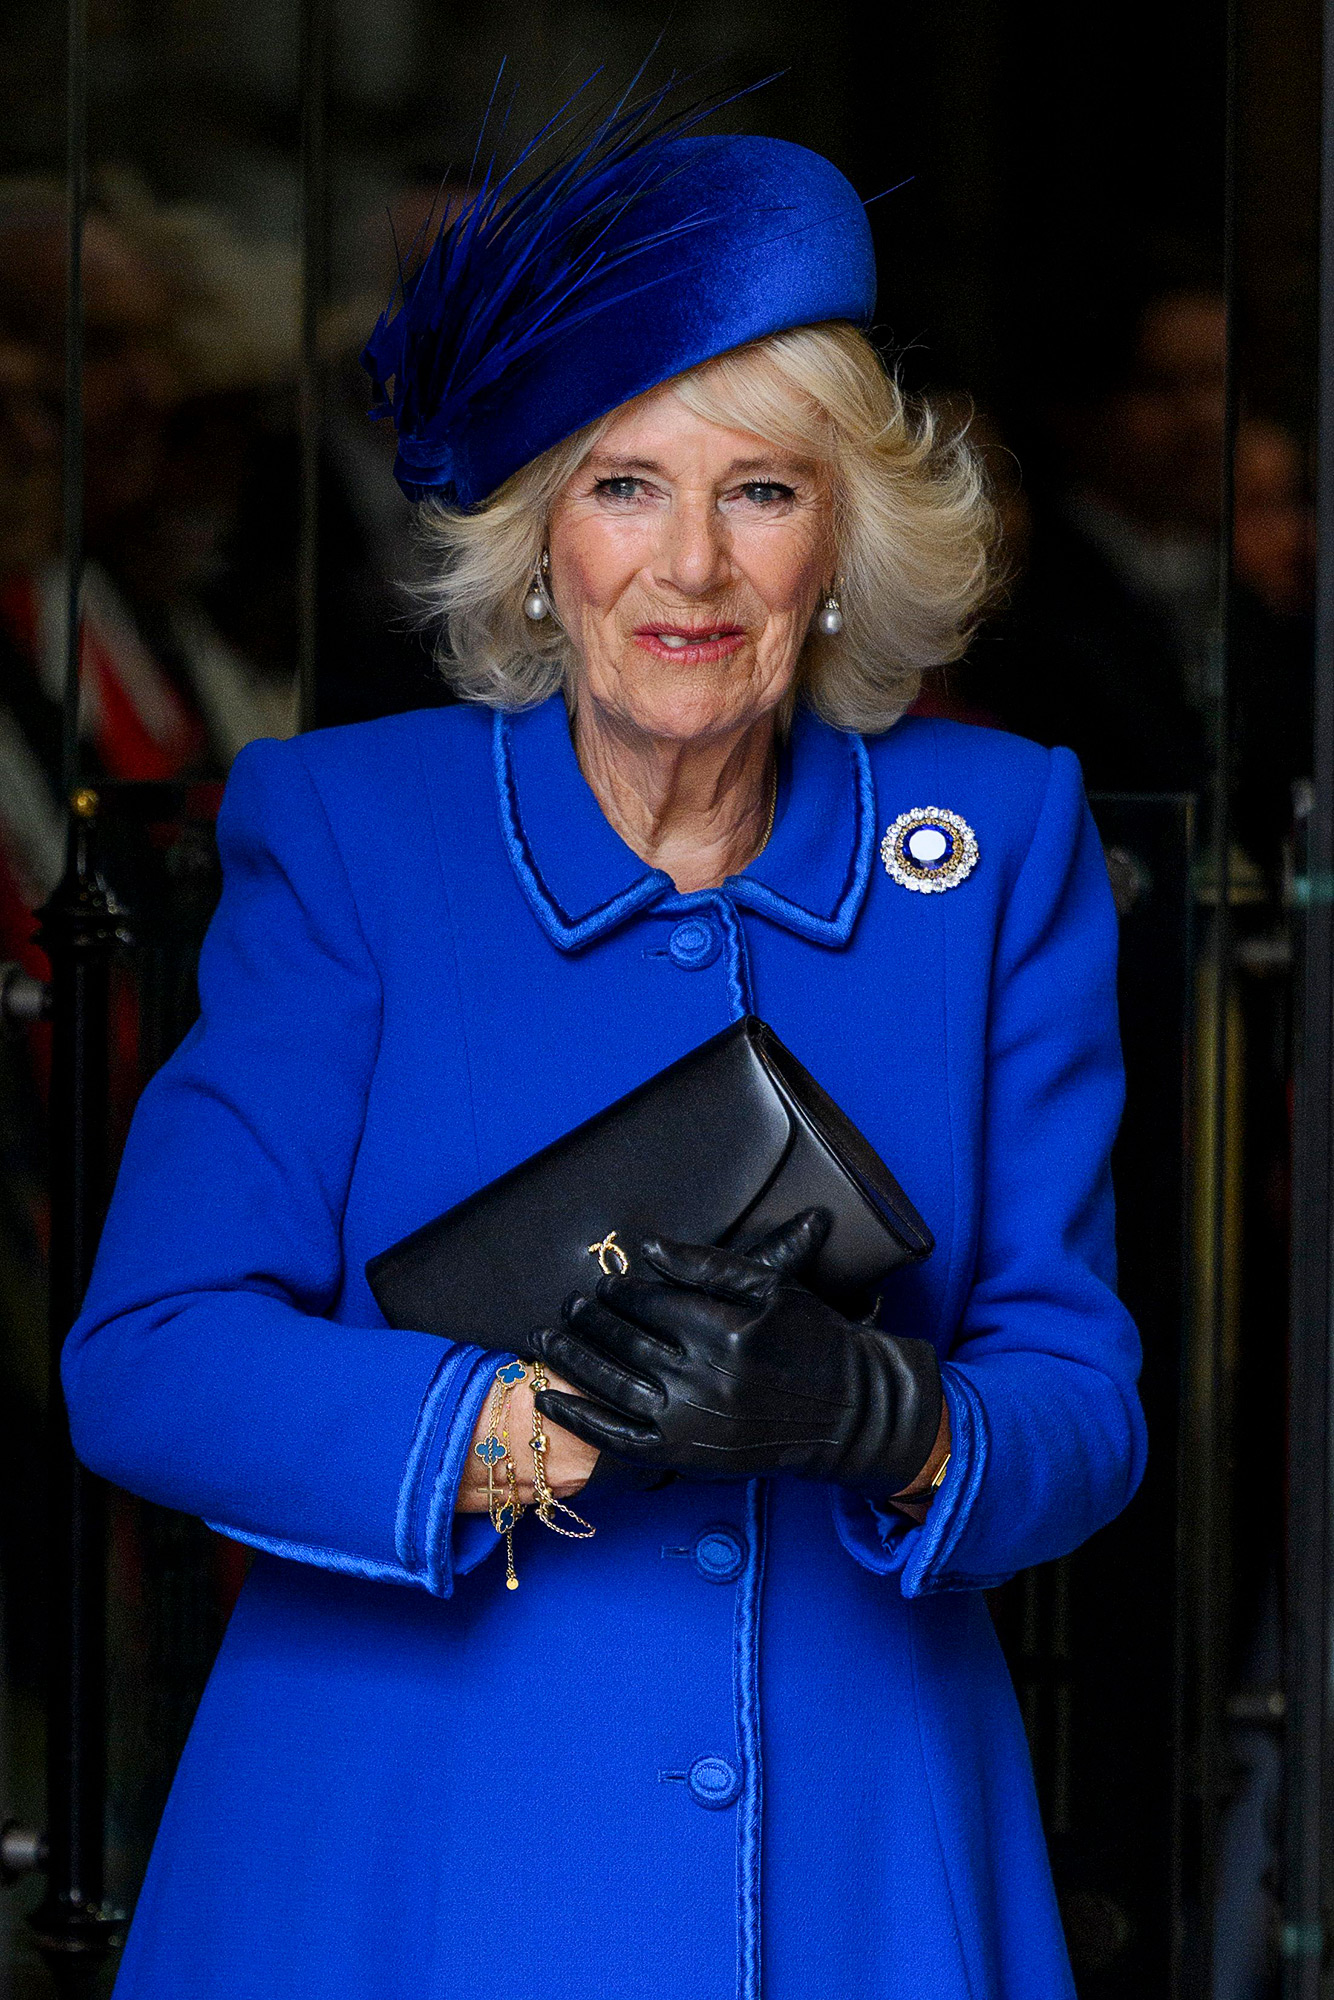 Camilla Parker Bowles Best Fashion The Most Remarkable Outfits the Duchess Has Worn Over the Years 699